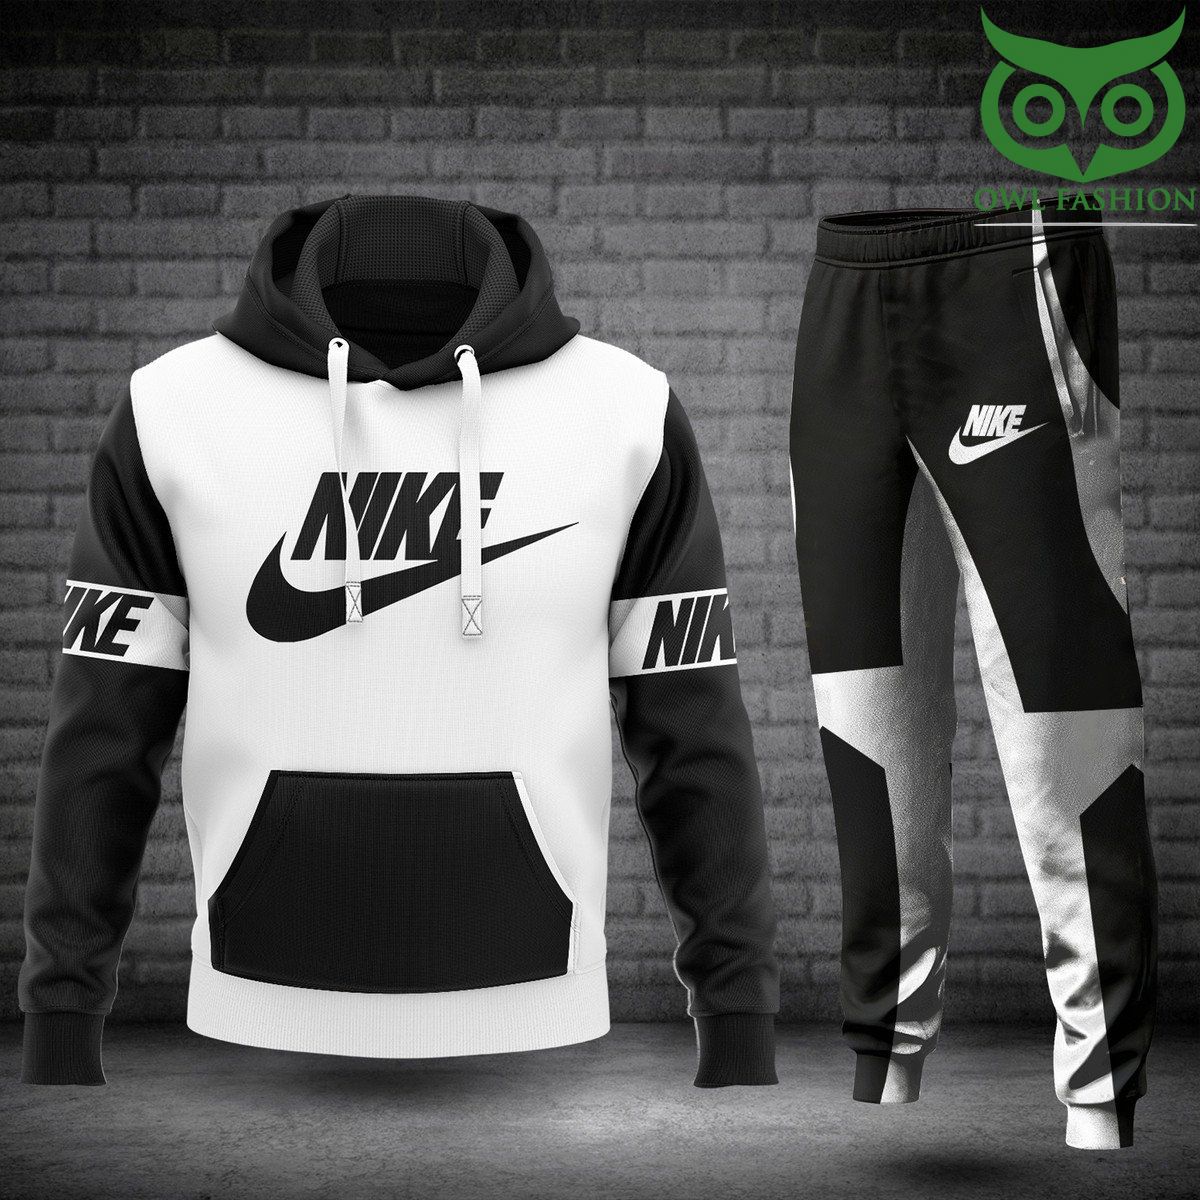 Nike white with black lines Hoodies and sweatpants